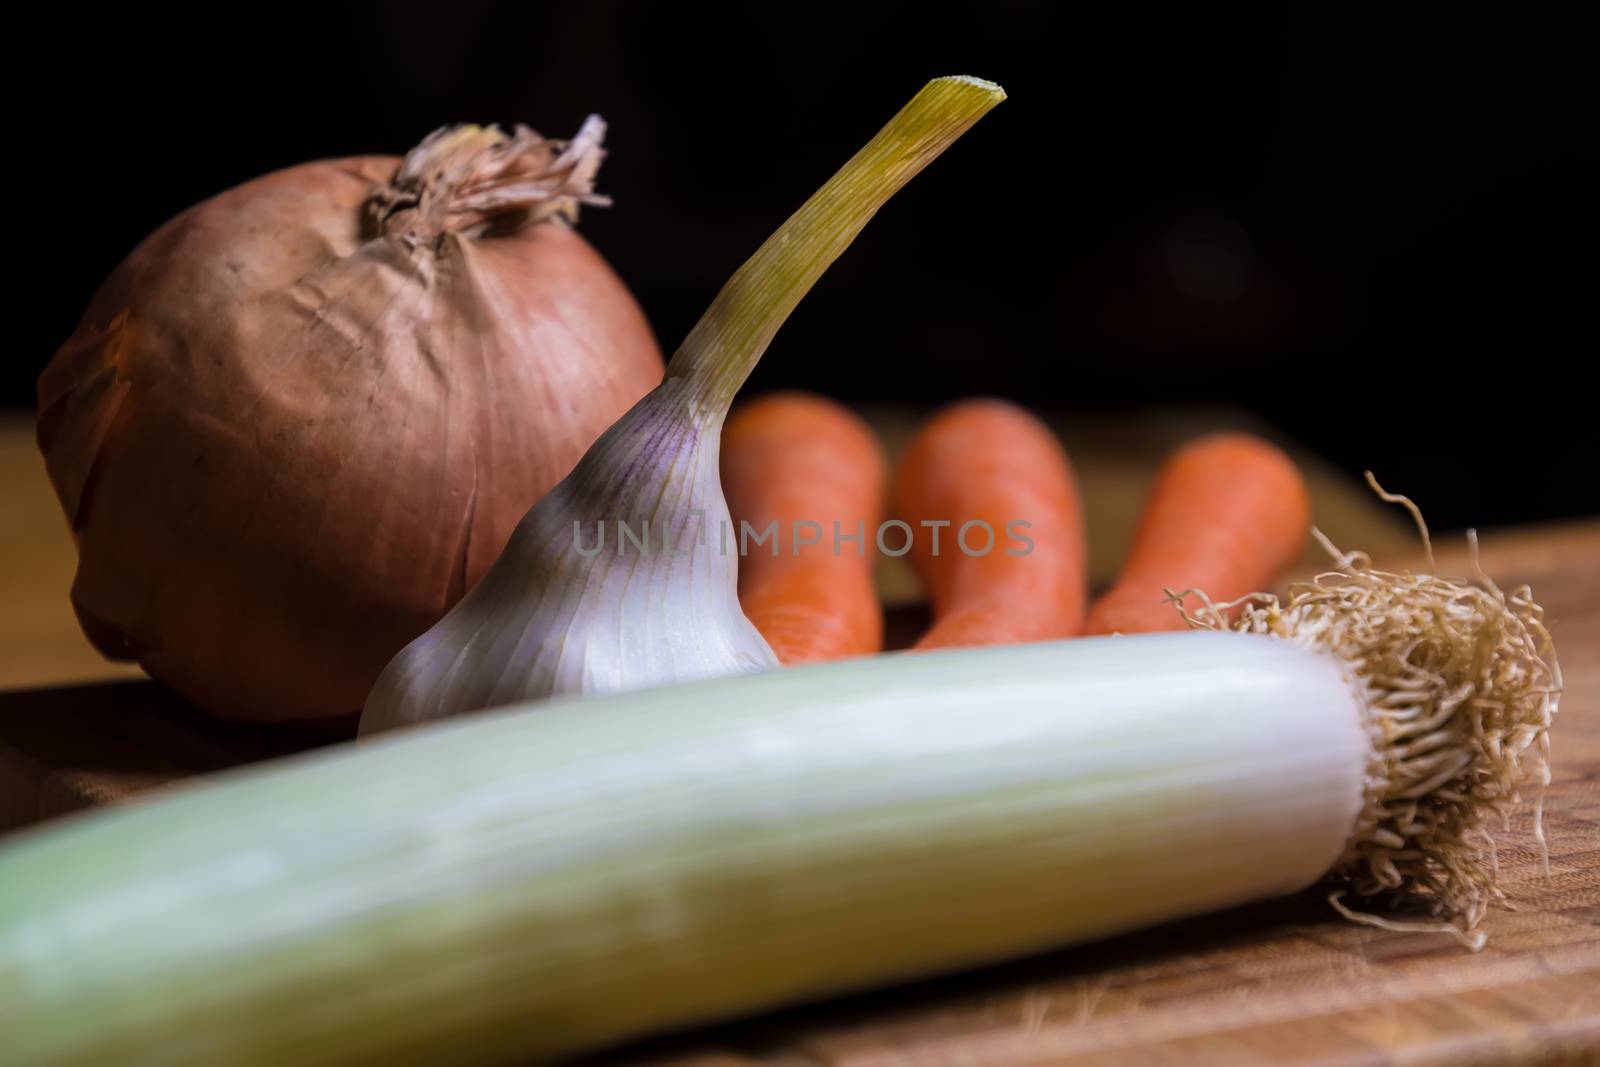 onion, leek, garlic and carrots on a table in the kitchen with dark background